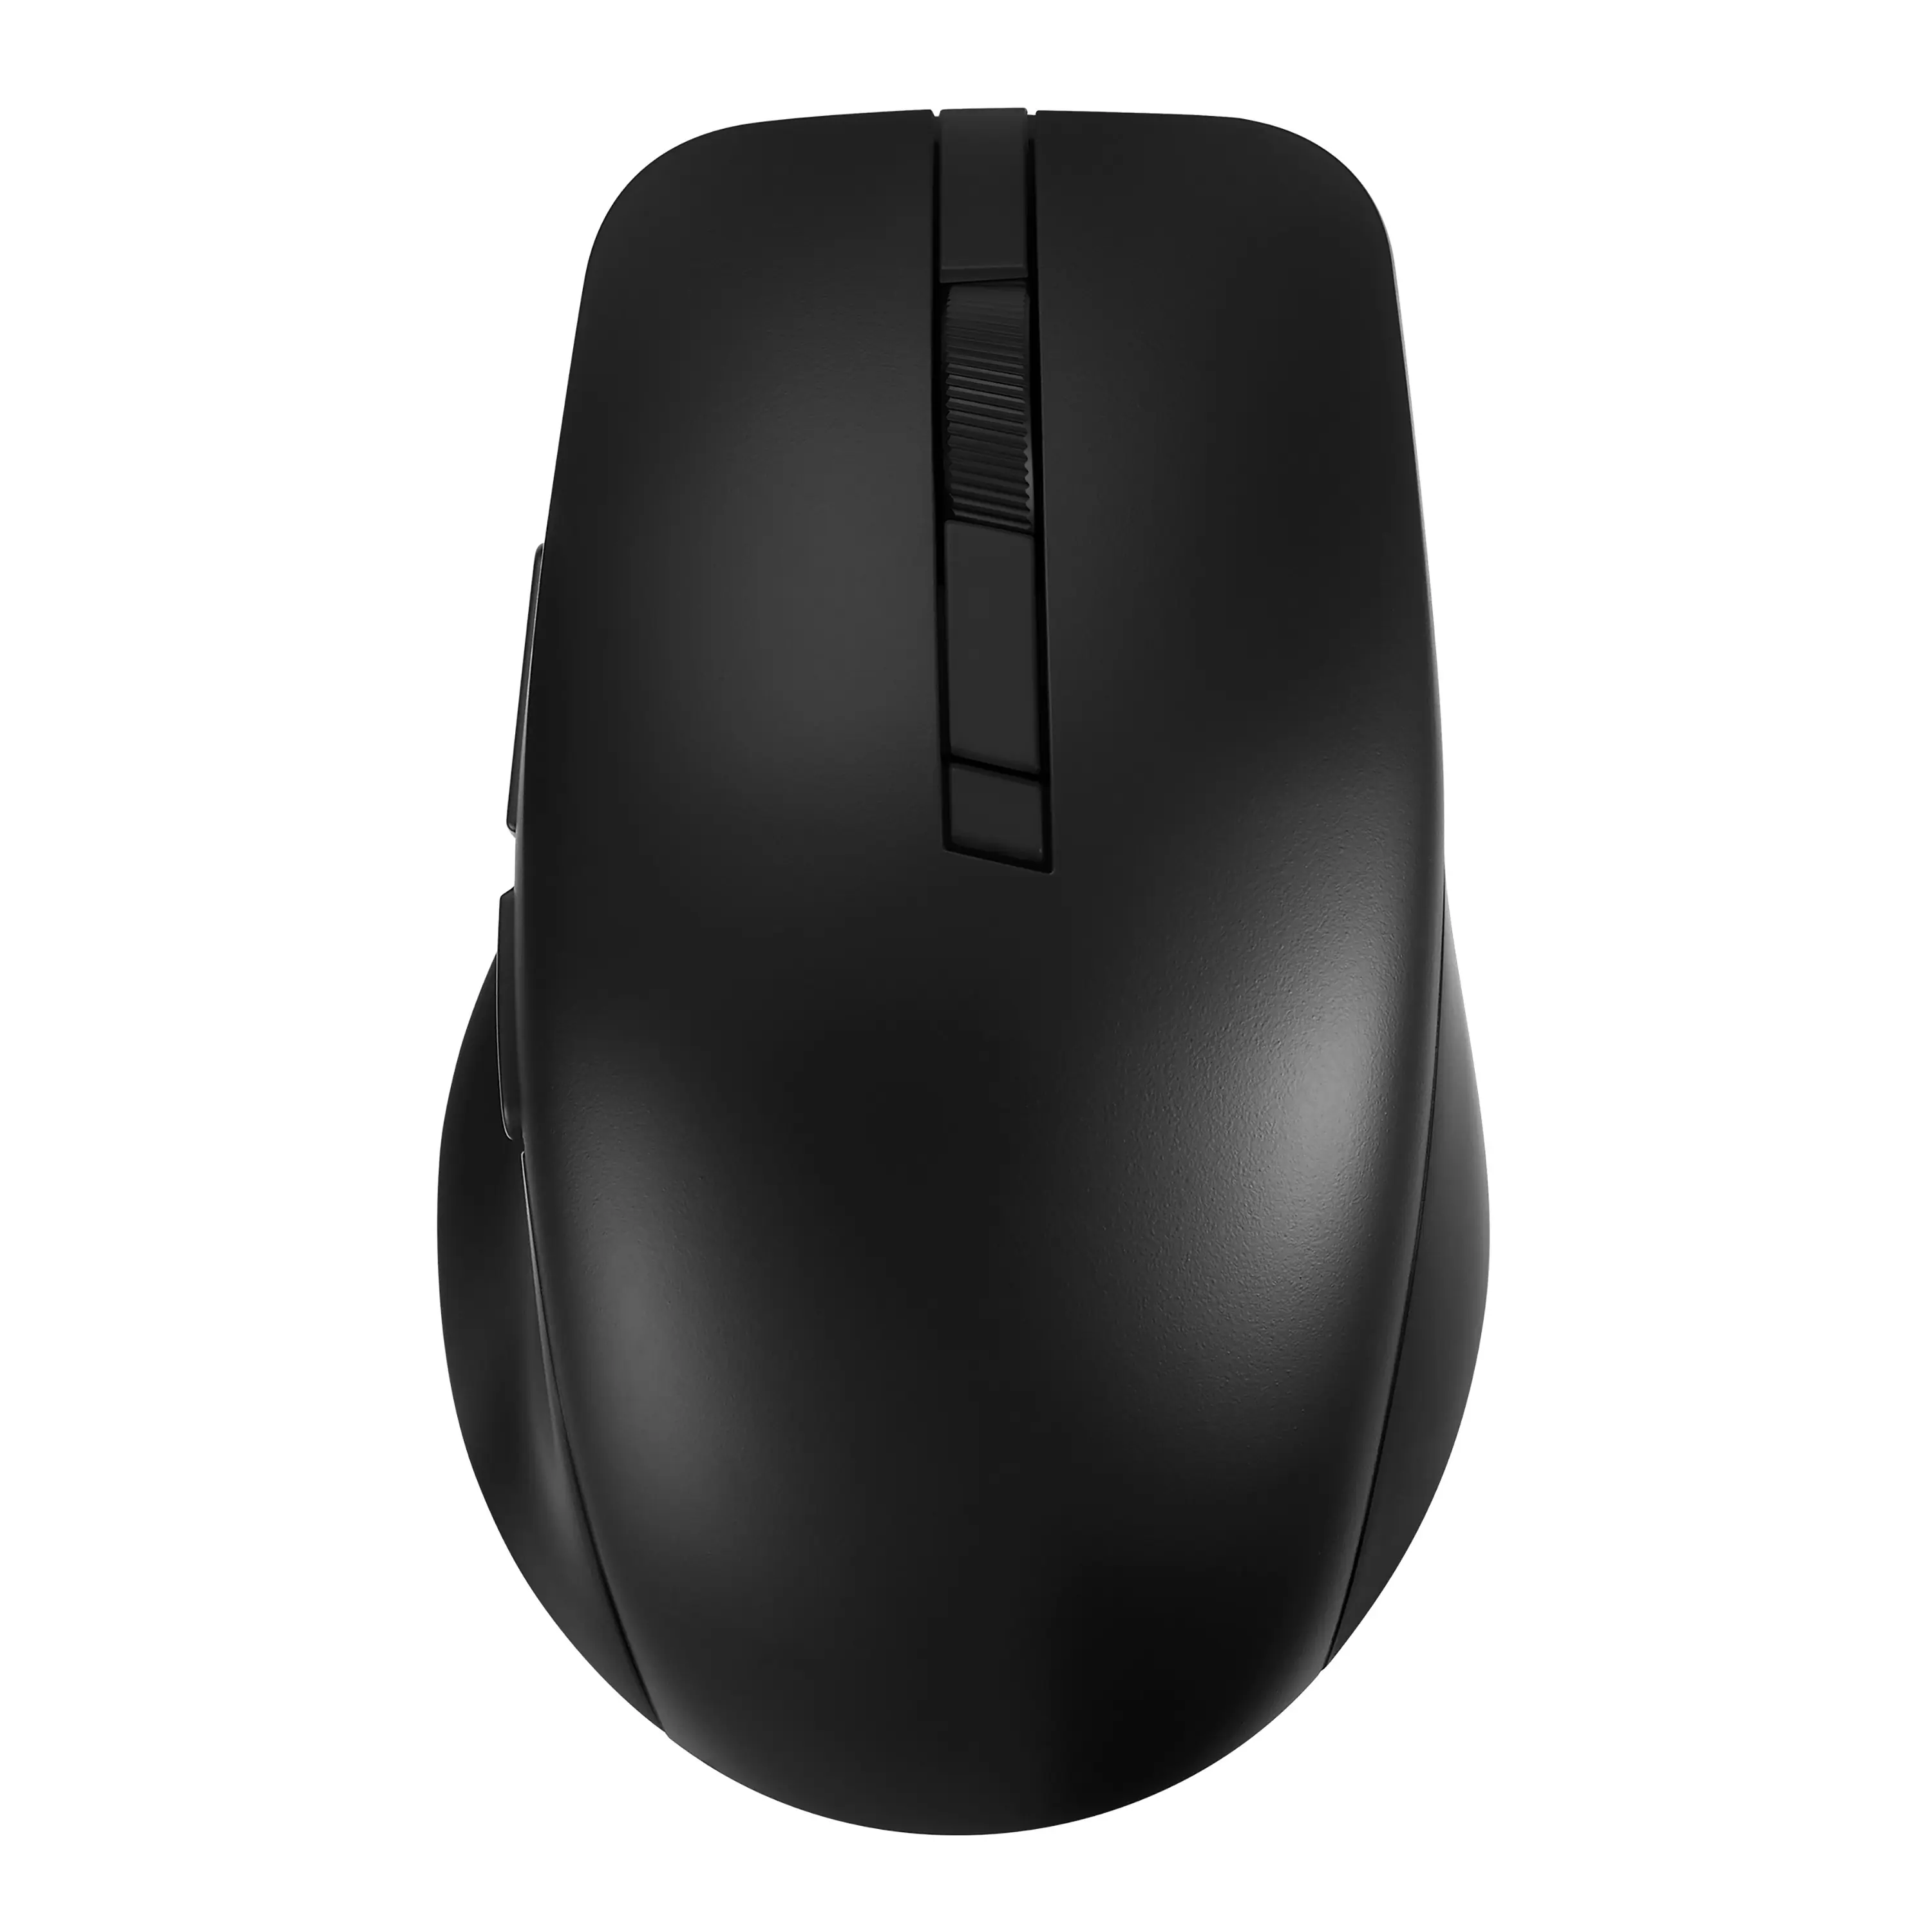 Asus MD200 MOUSE/BK